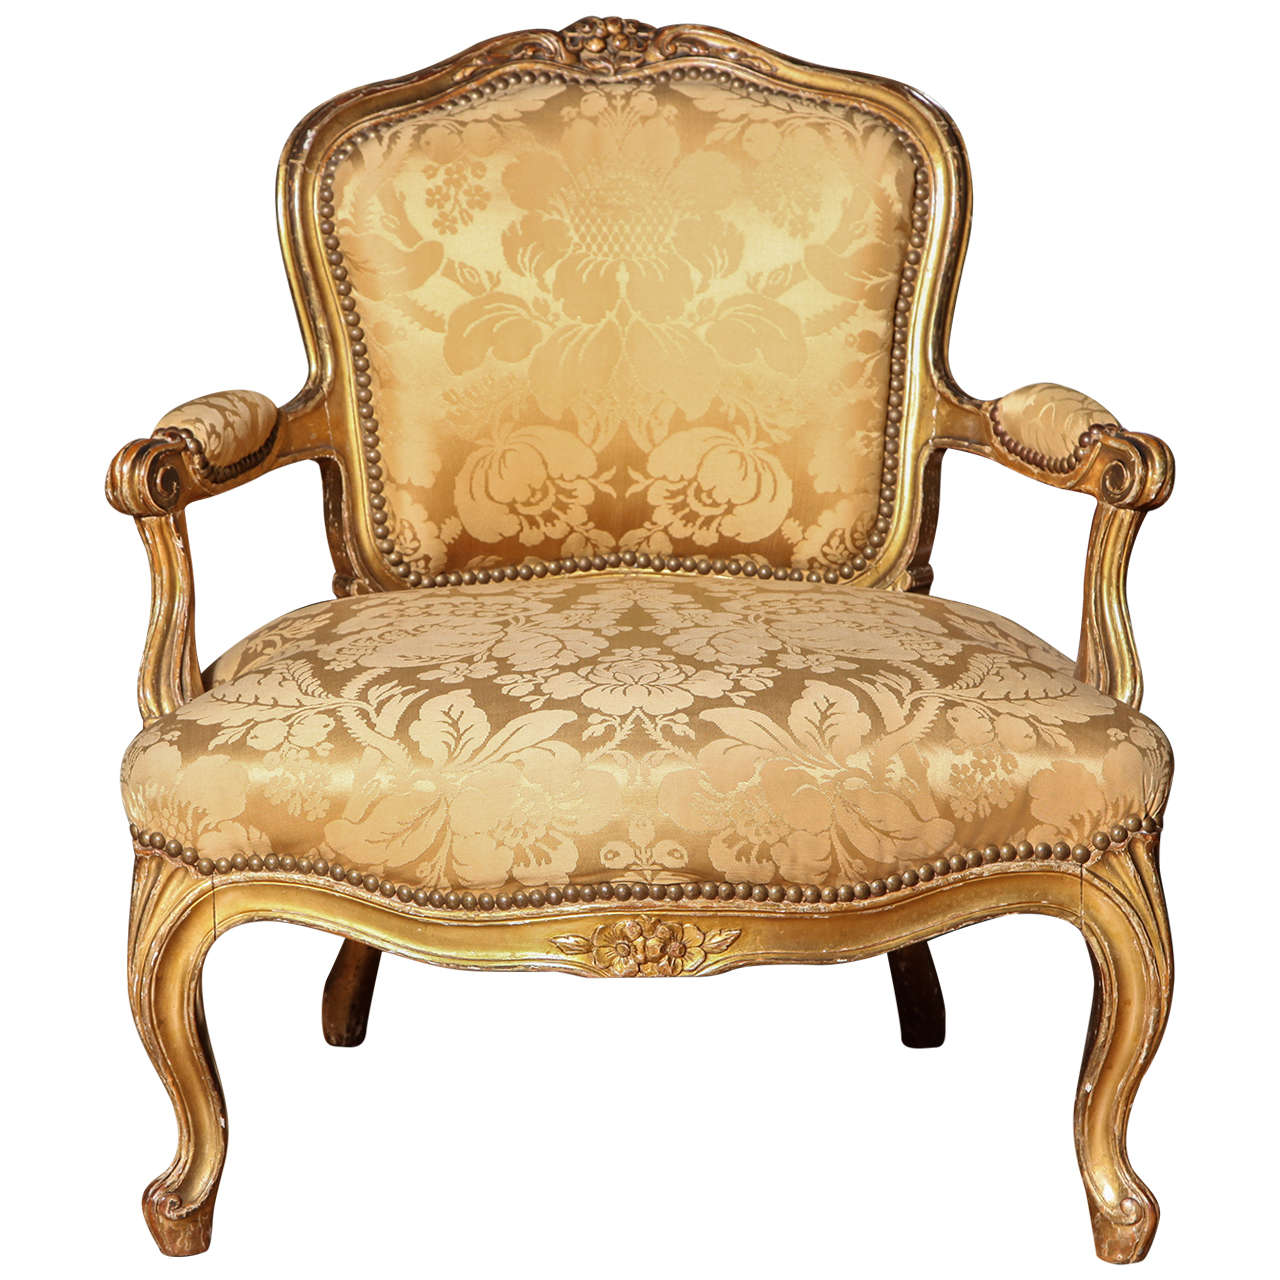 A Louis XV Carved and Gilded "Chaffuese" or Childs Chair, France Late 19th C